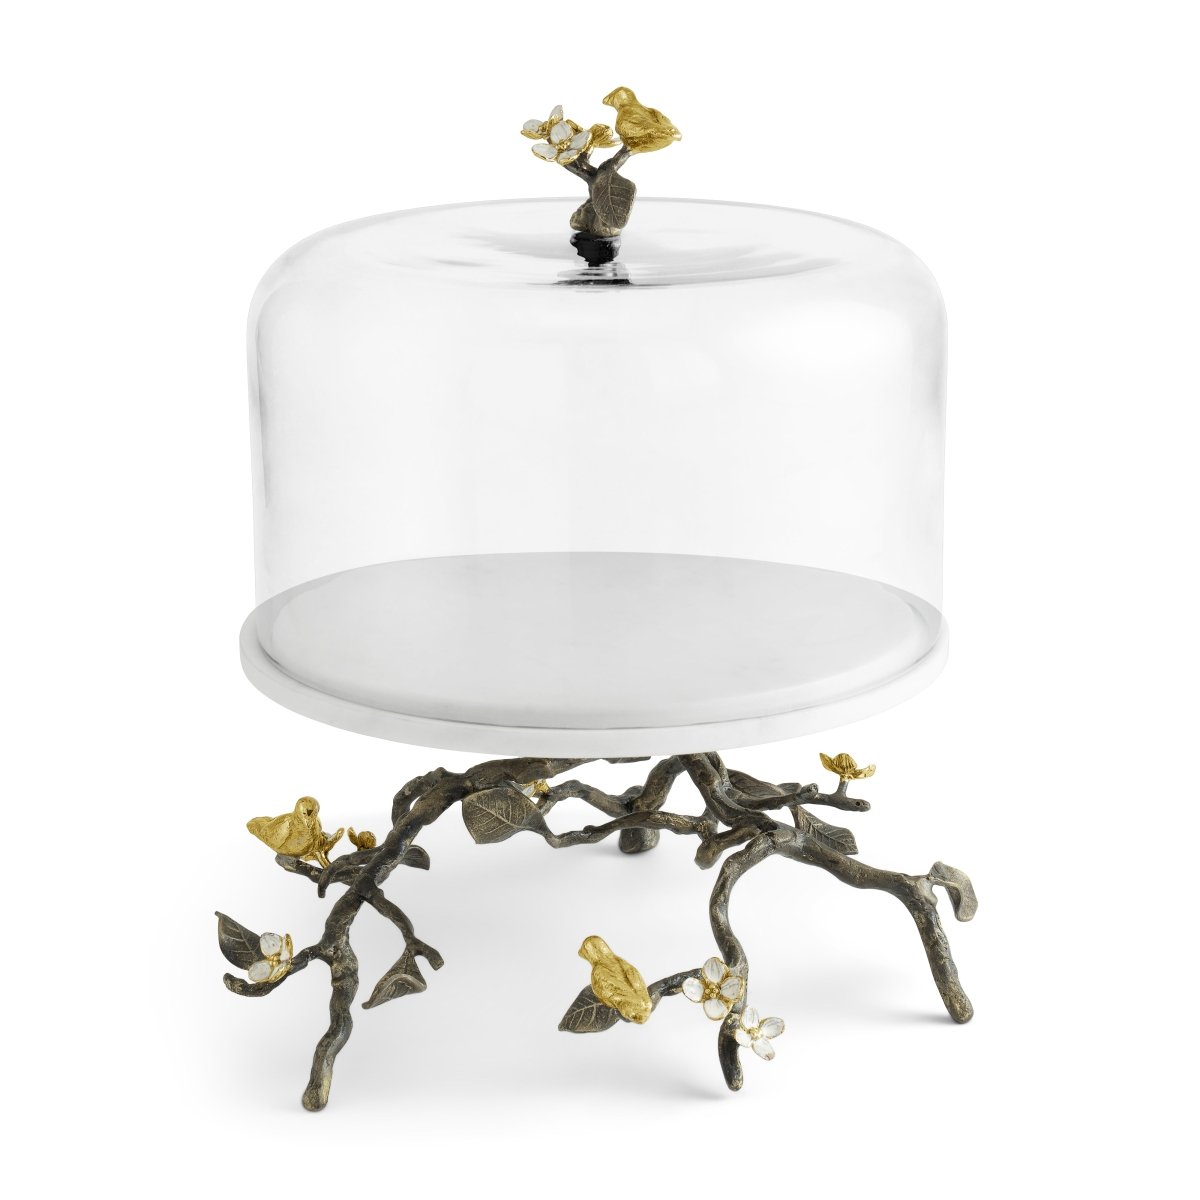 Michael Aram Lovebirds Cake Stand with Dome